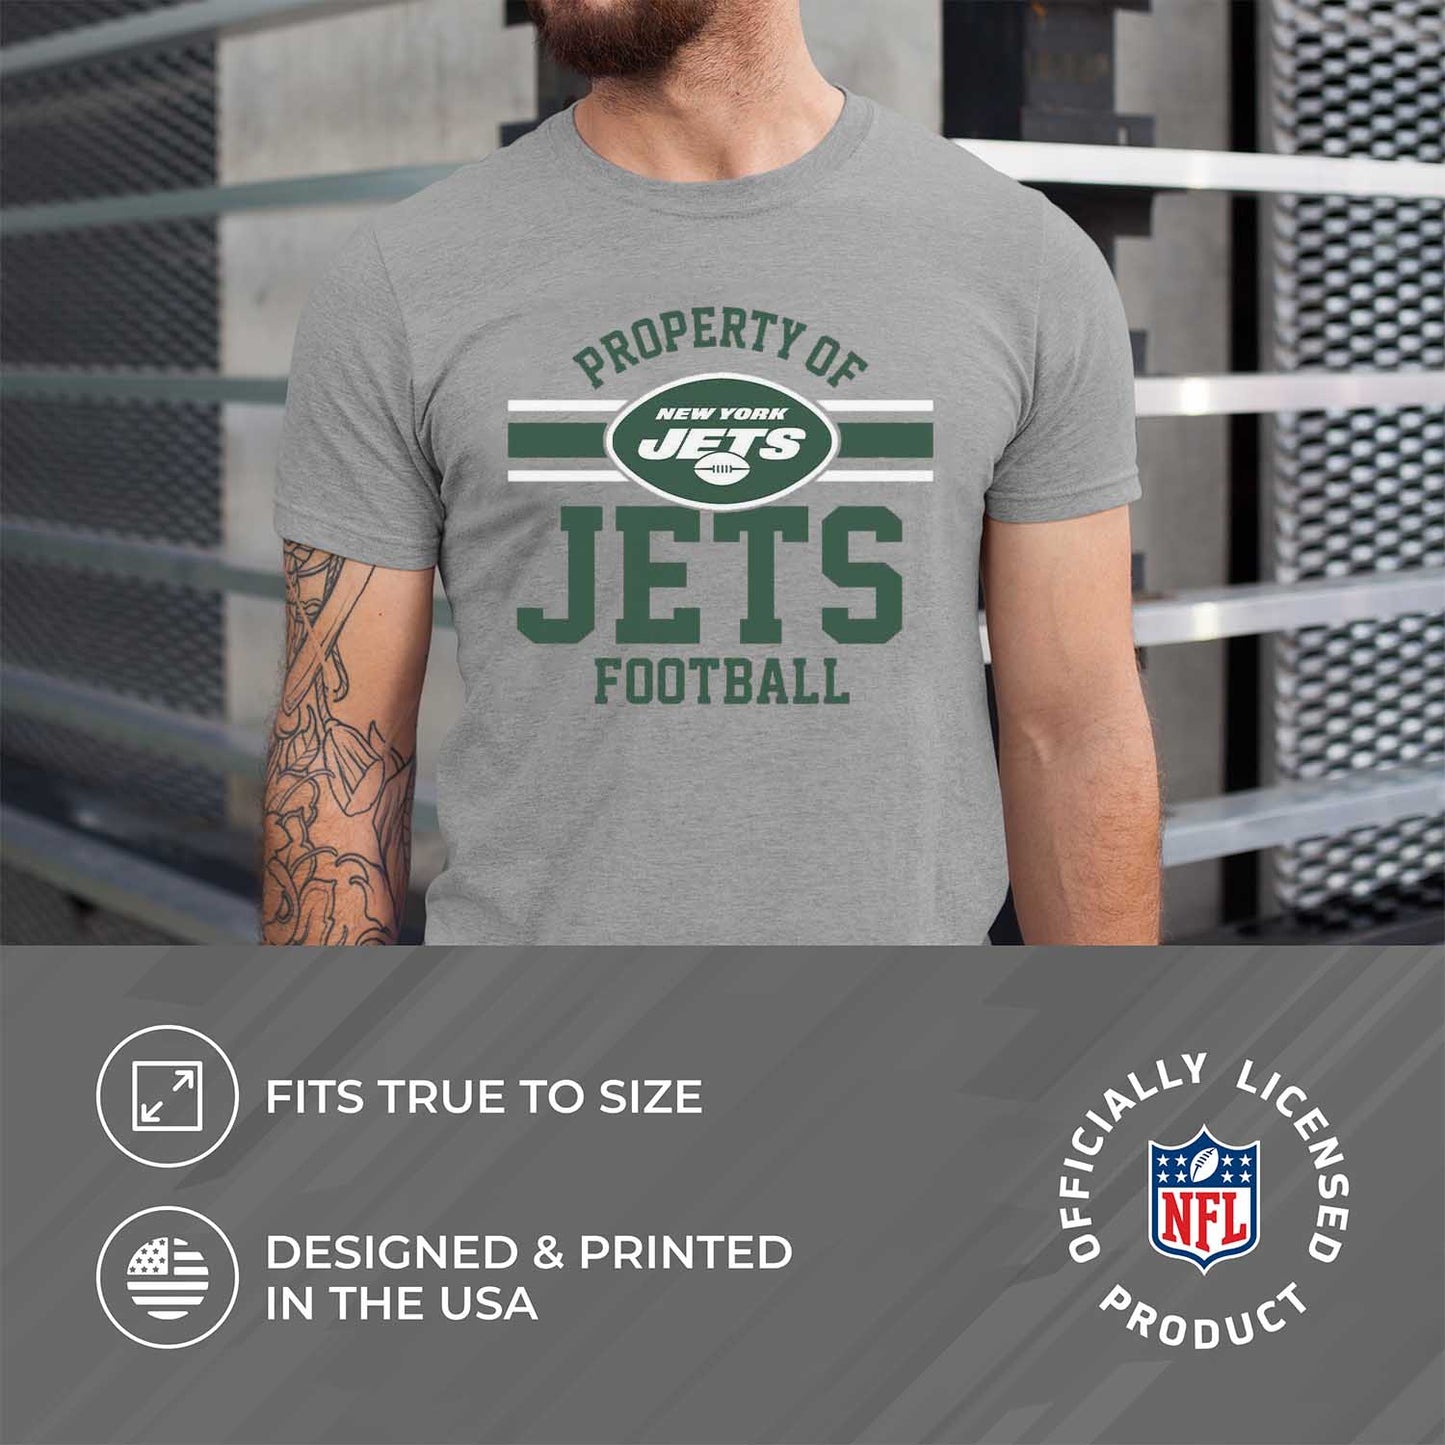 New York Jets NFL Adult Property Of T-Shirt - Sport Gray